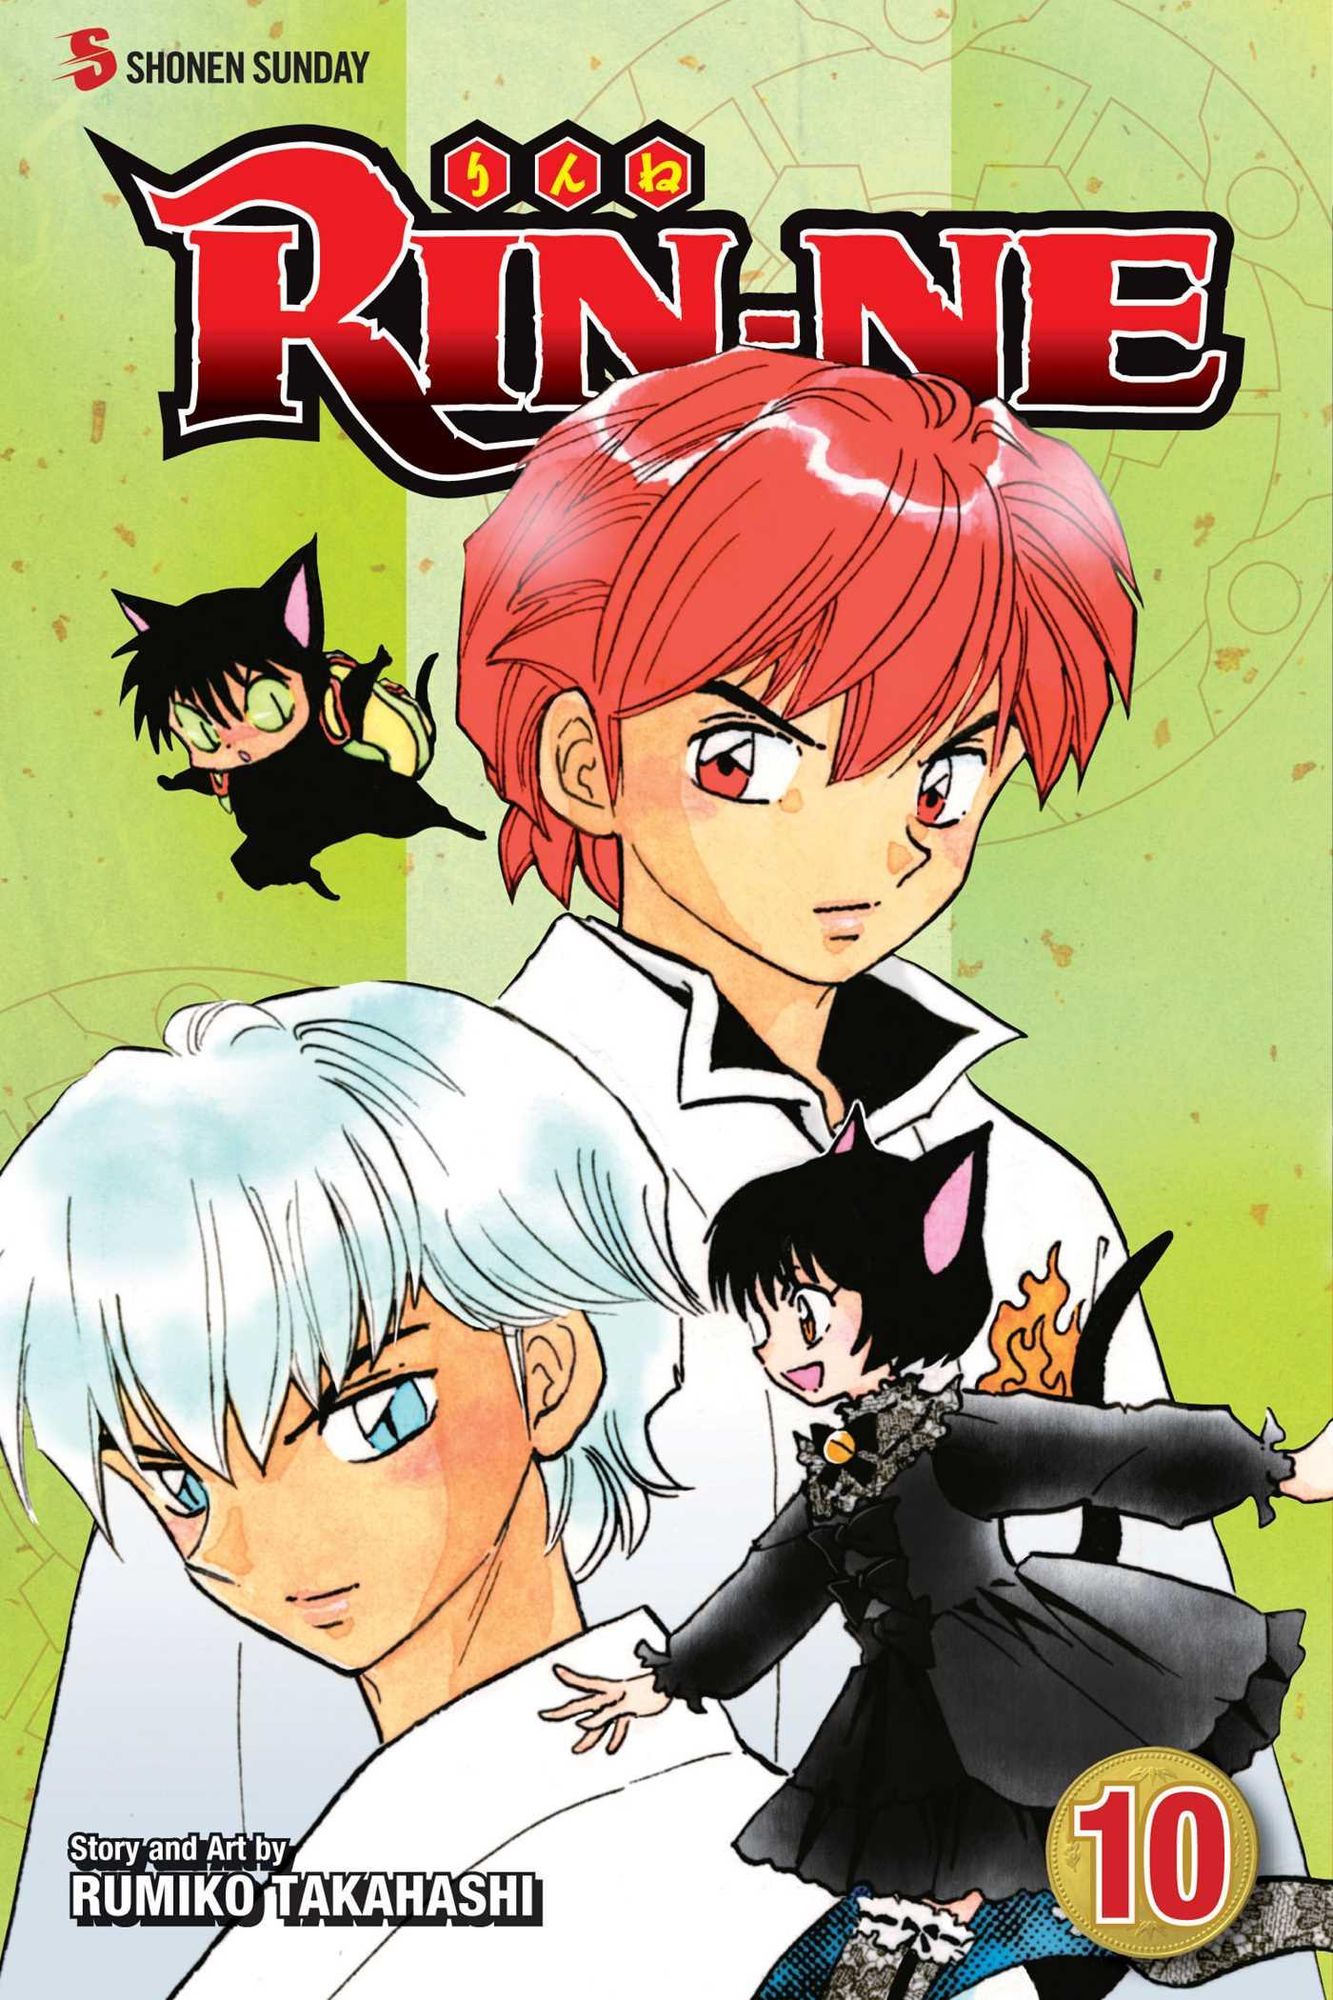 RIN-NE, Vol. 1: Death can be a laughing by Takahashi, Rumiko